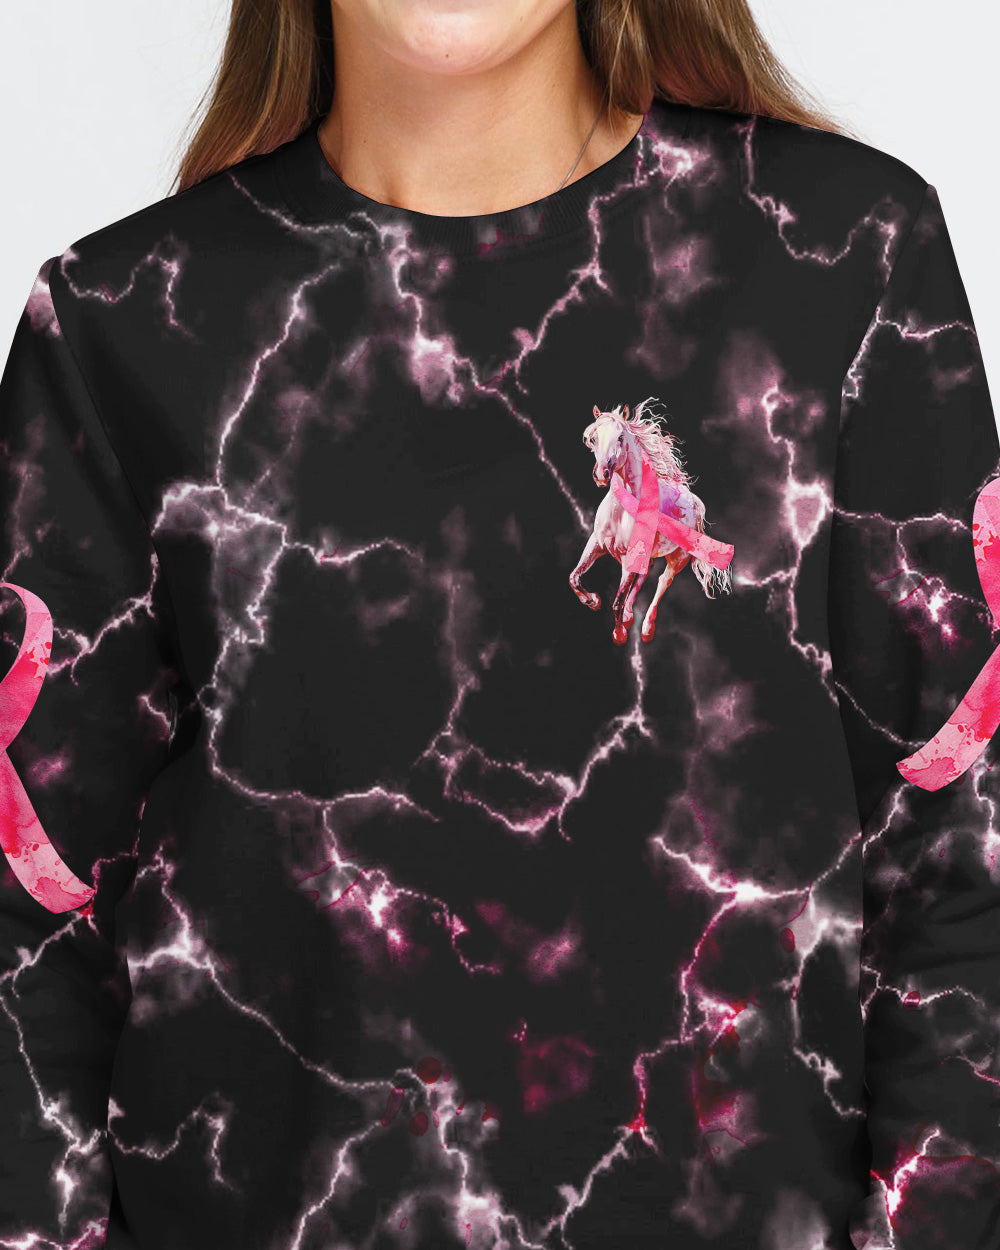 Be Stronger Than The Storm Horse Women's Breast Cancer Awareness Sweatshirt